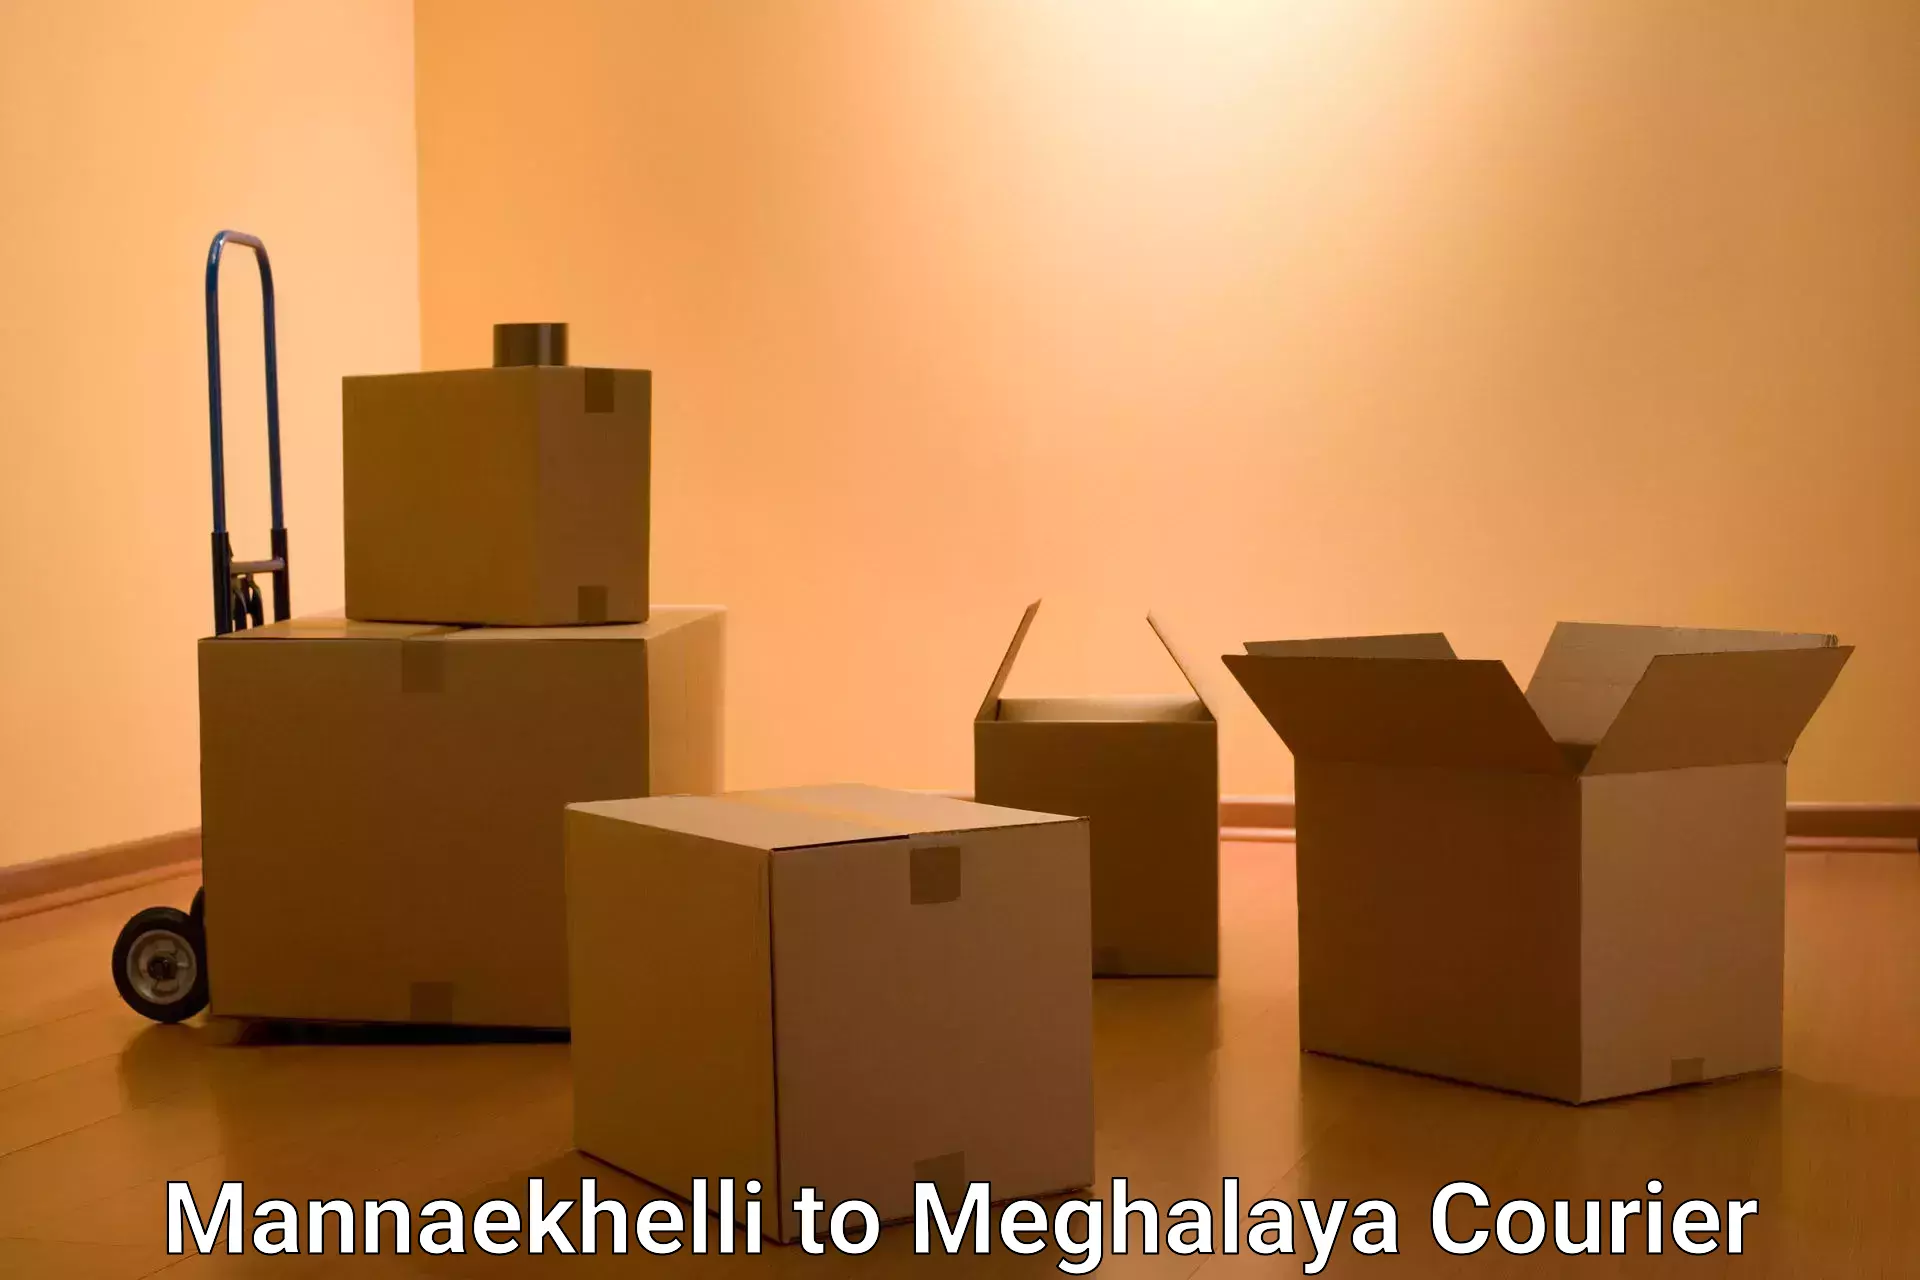 Subscription-based courier Mannaekhelli to Nongstoin